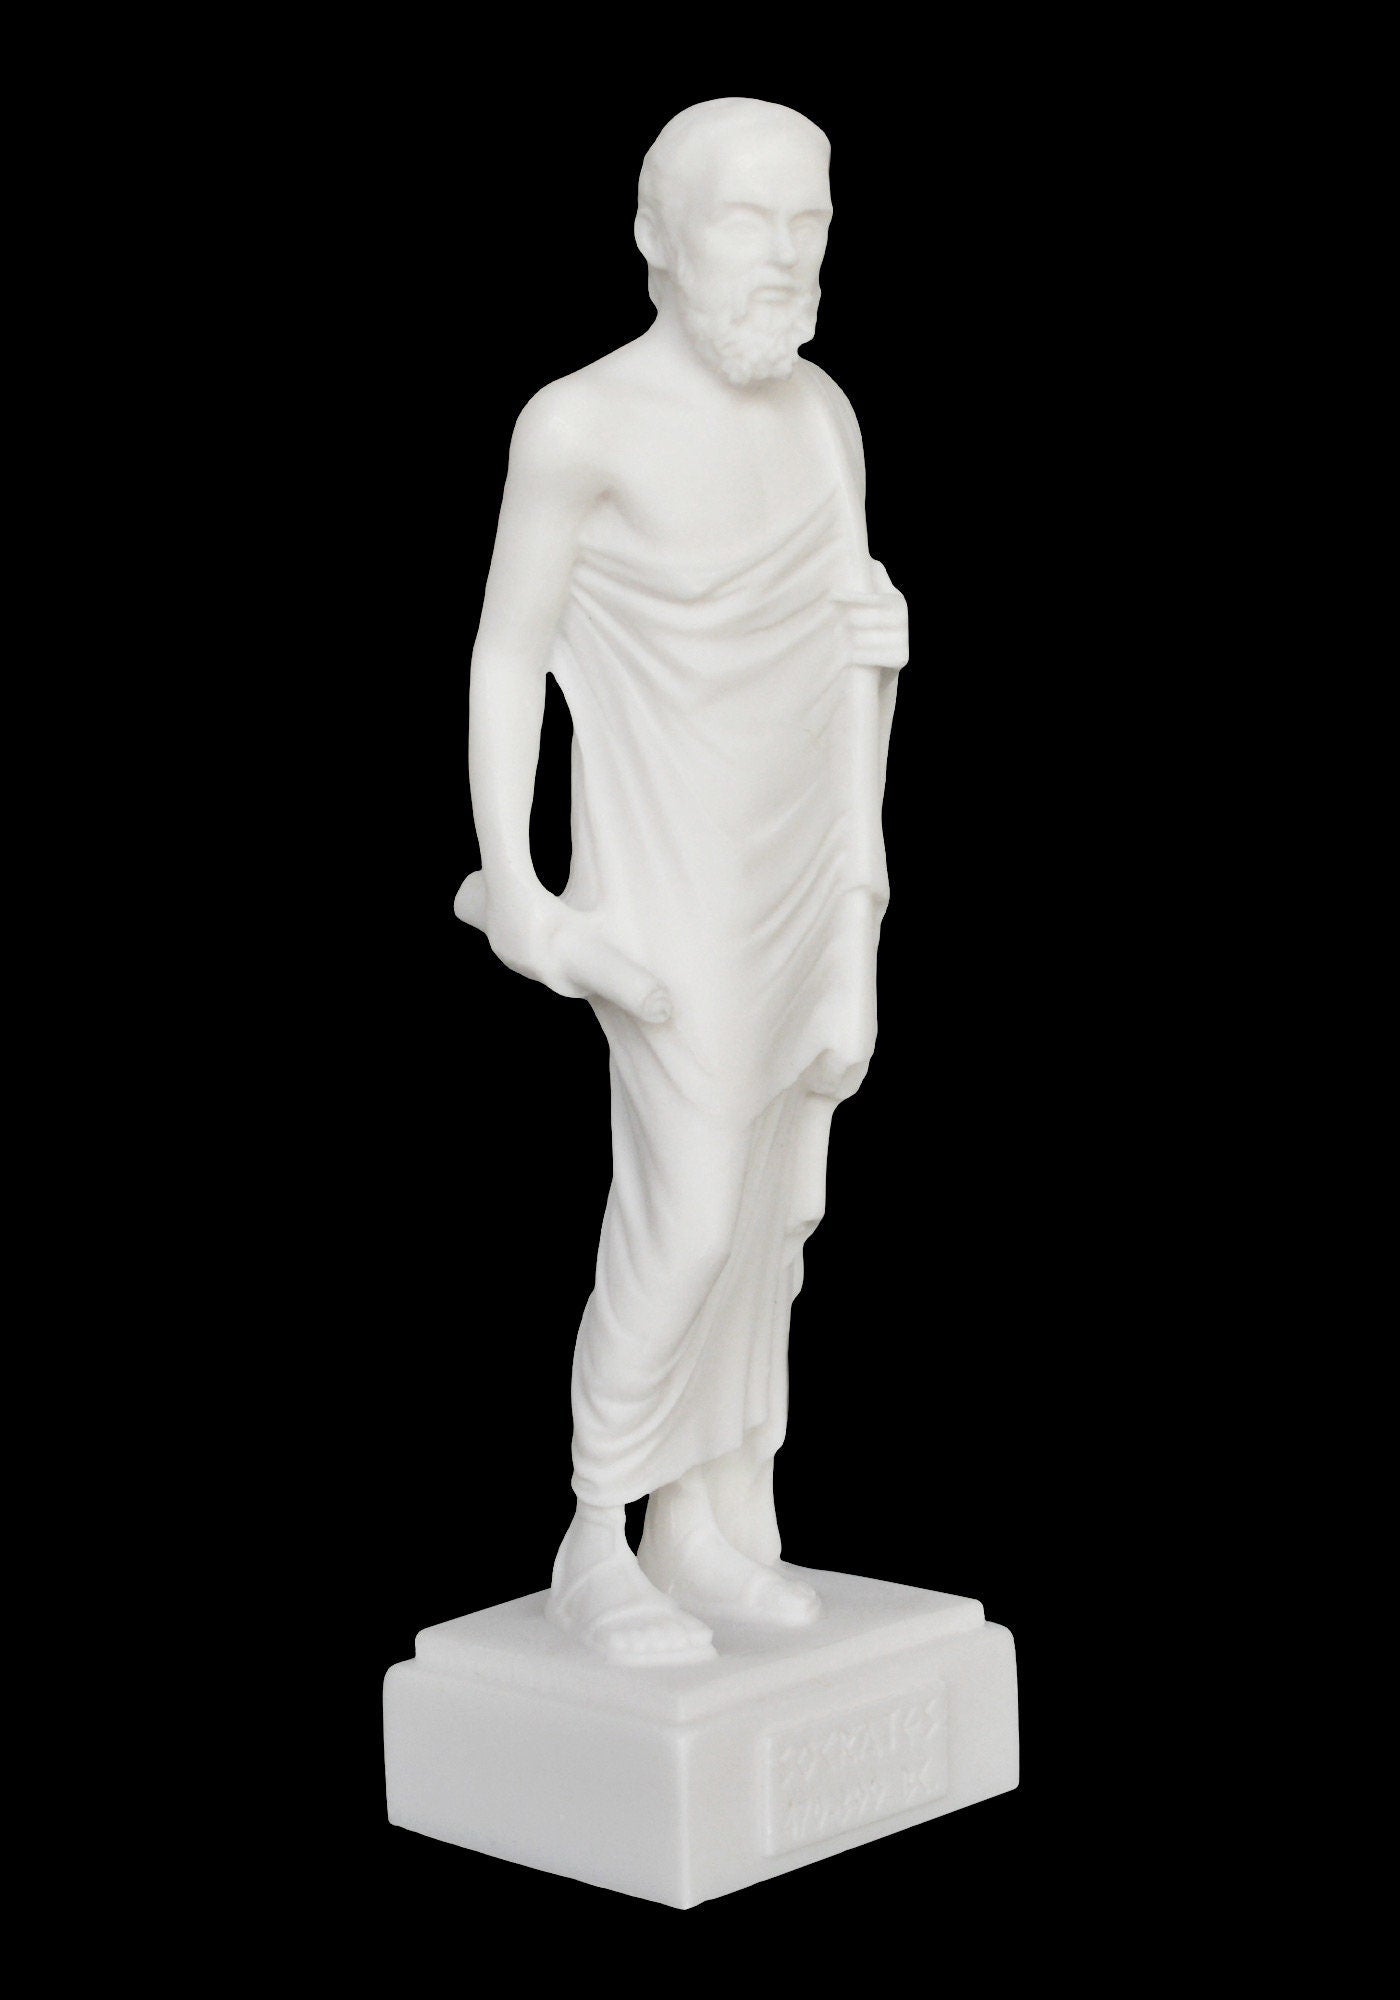 Socrates - Ancient Greek Philosopher - 470-399 BC - Teacher of Plato - Father of Western Philosophy - Alabaster Statue